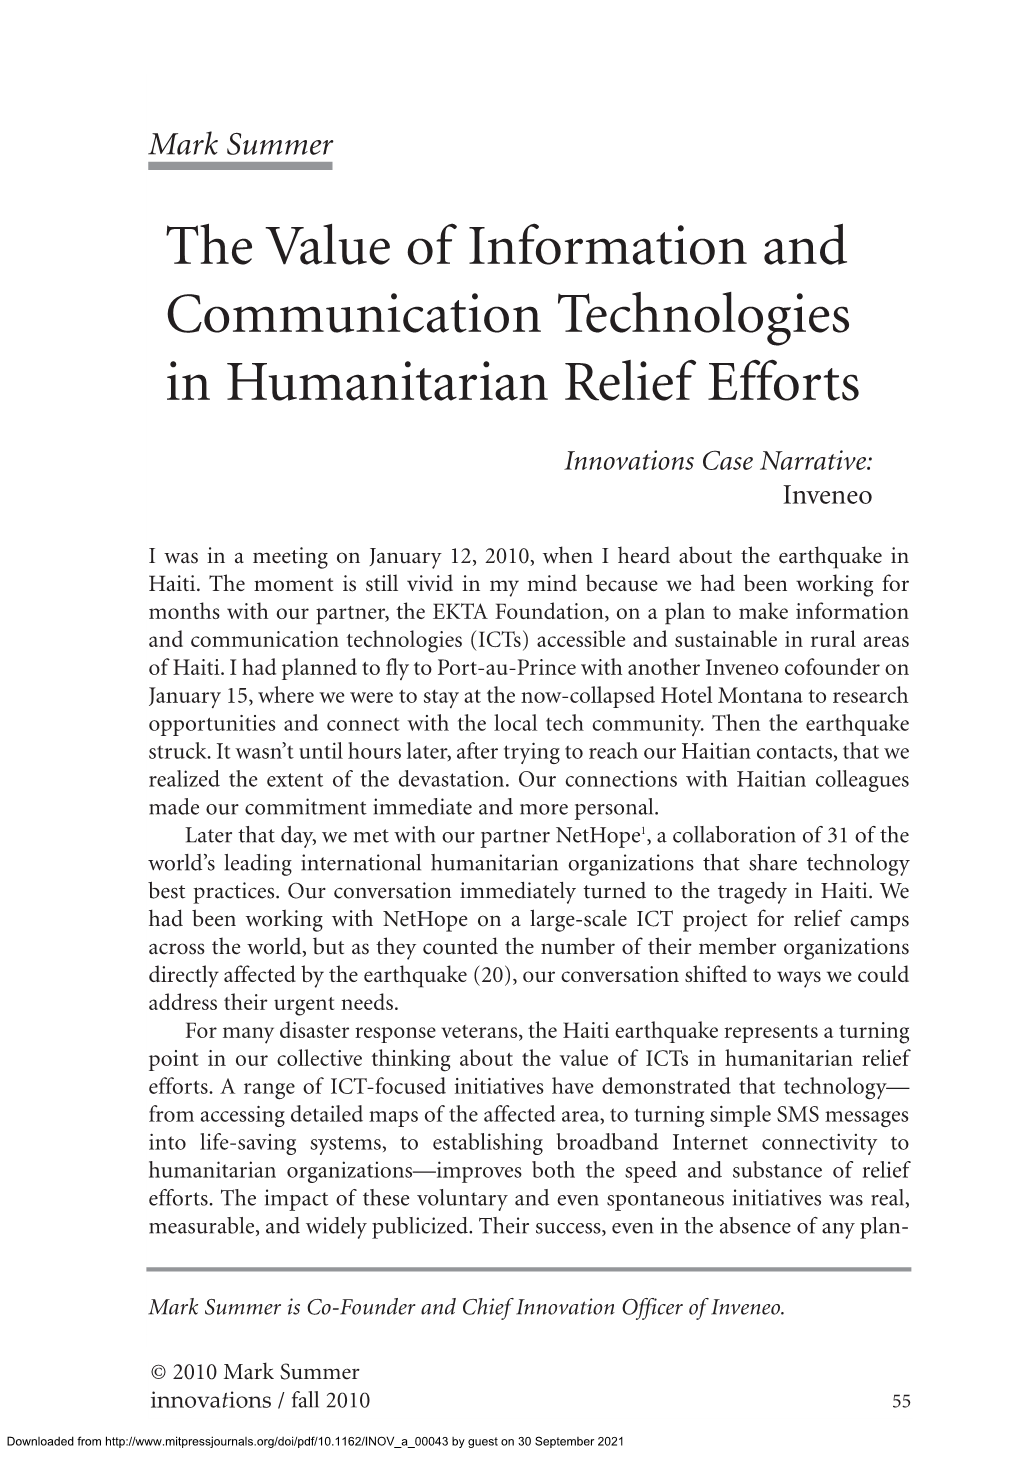 The Value of Information and Communication Technologies in Humanitarian Relief Efforts